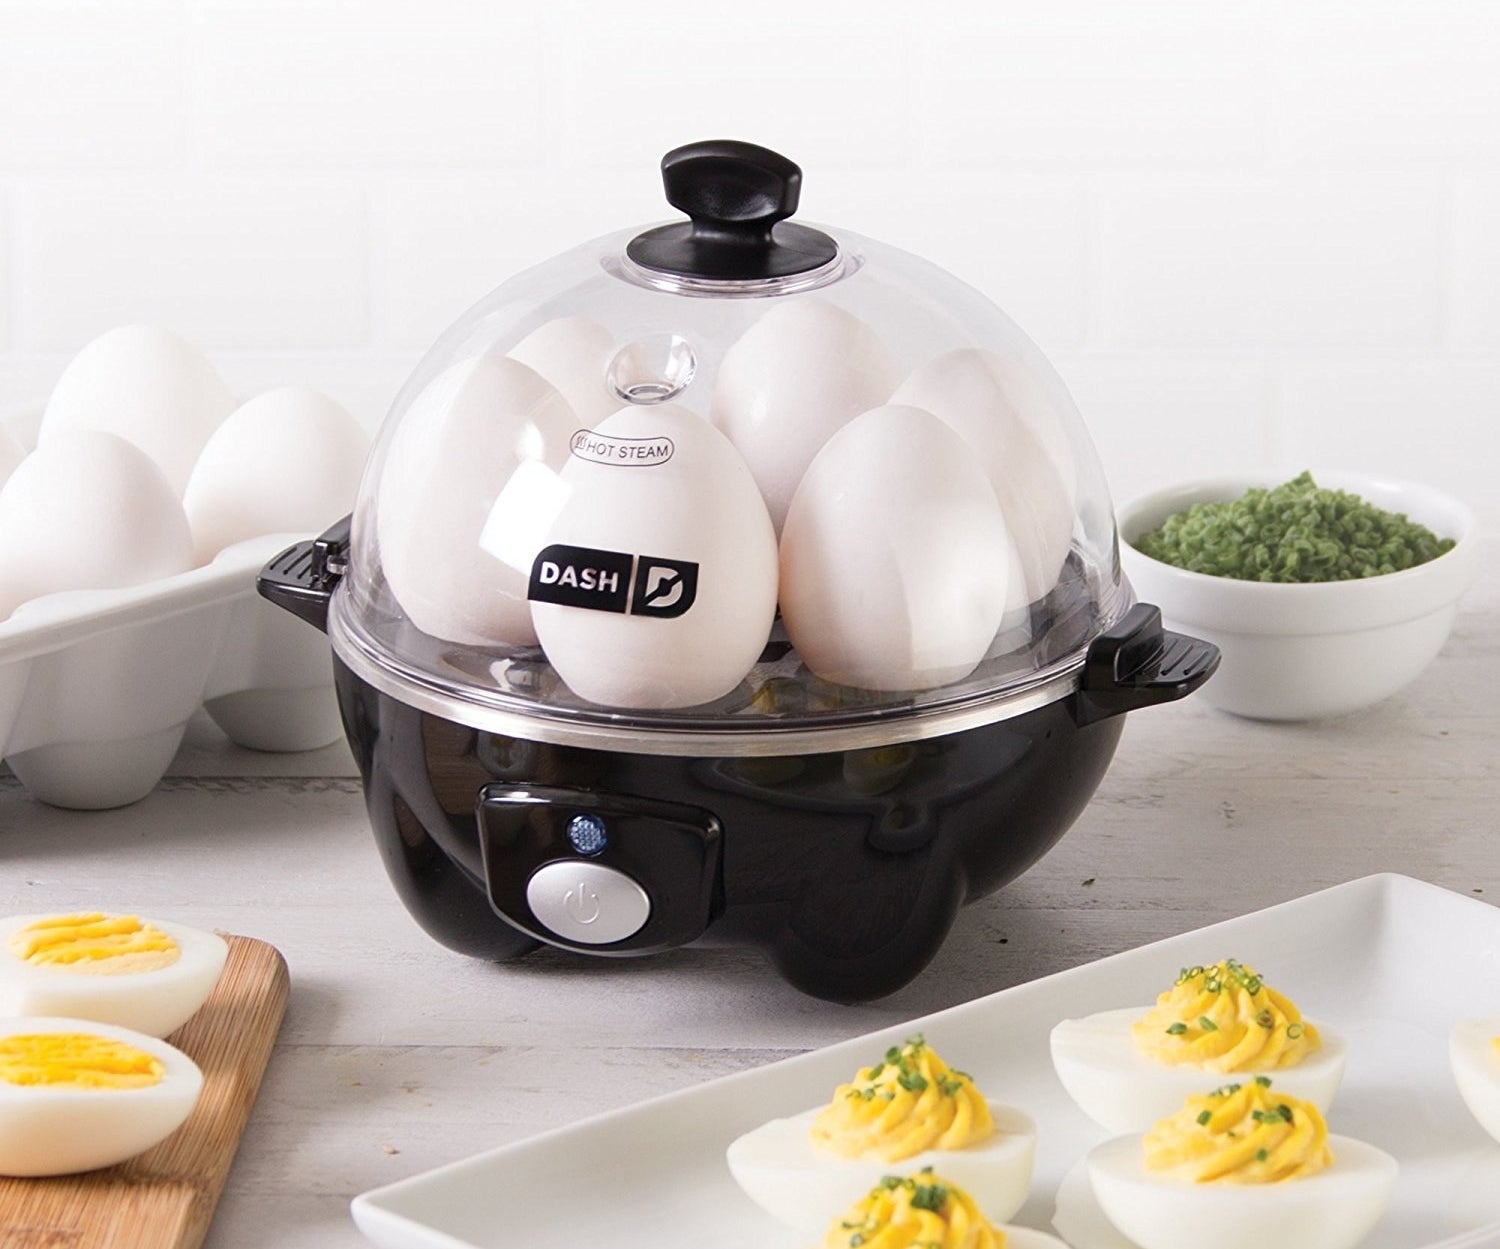 The egg cooker, which holds six eggs at once